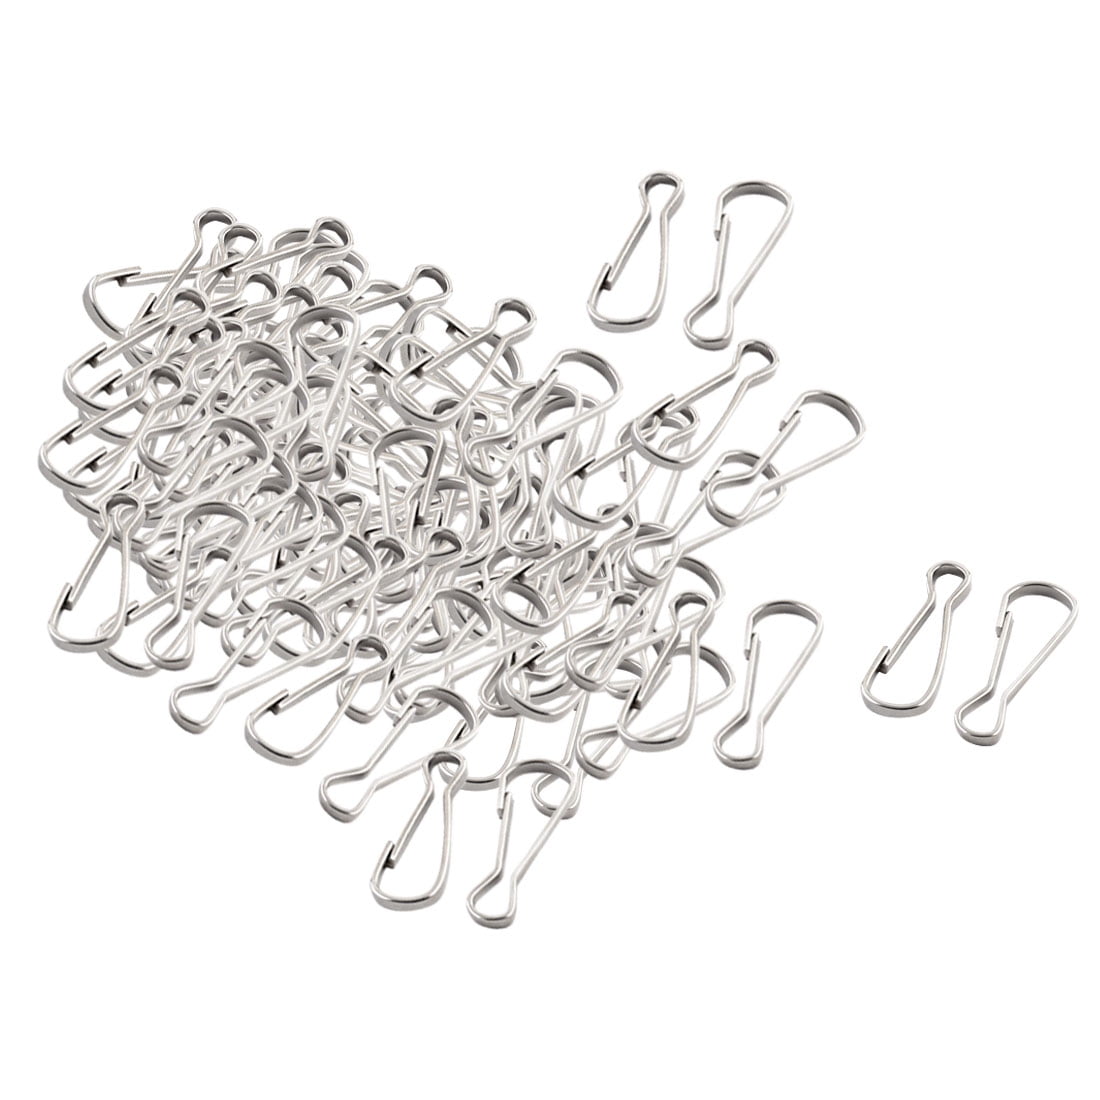 0.9x 0.3 Stainless Steel Lanyard Snap Spring Clips Hooks Silver